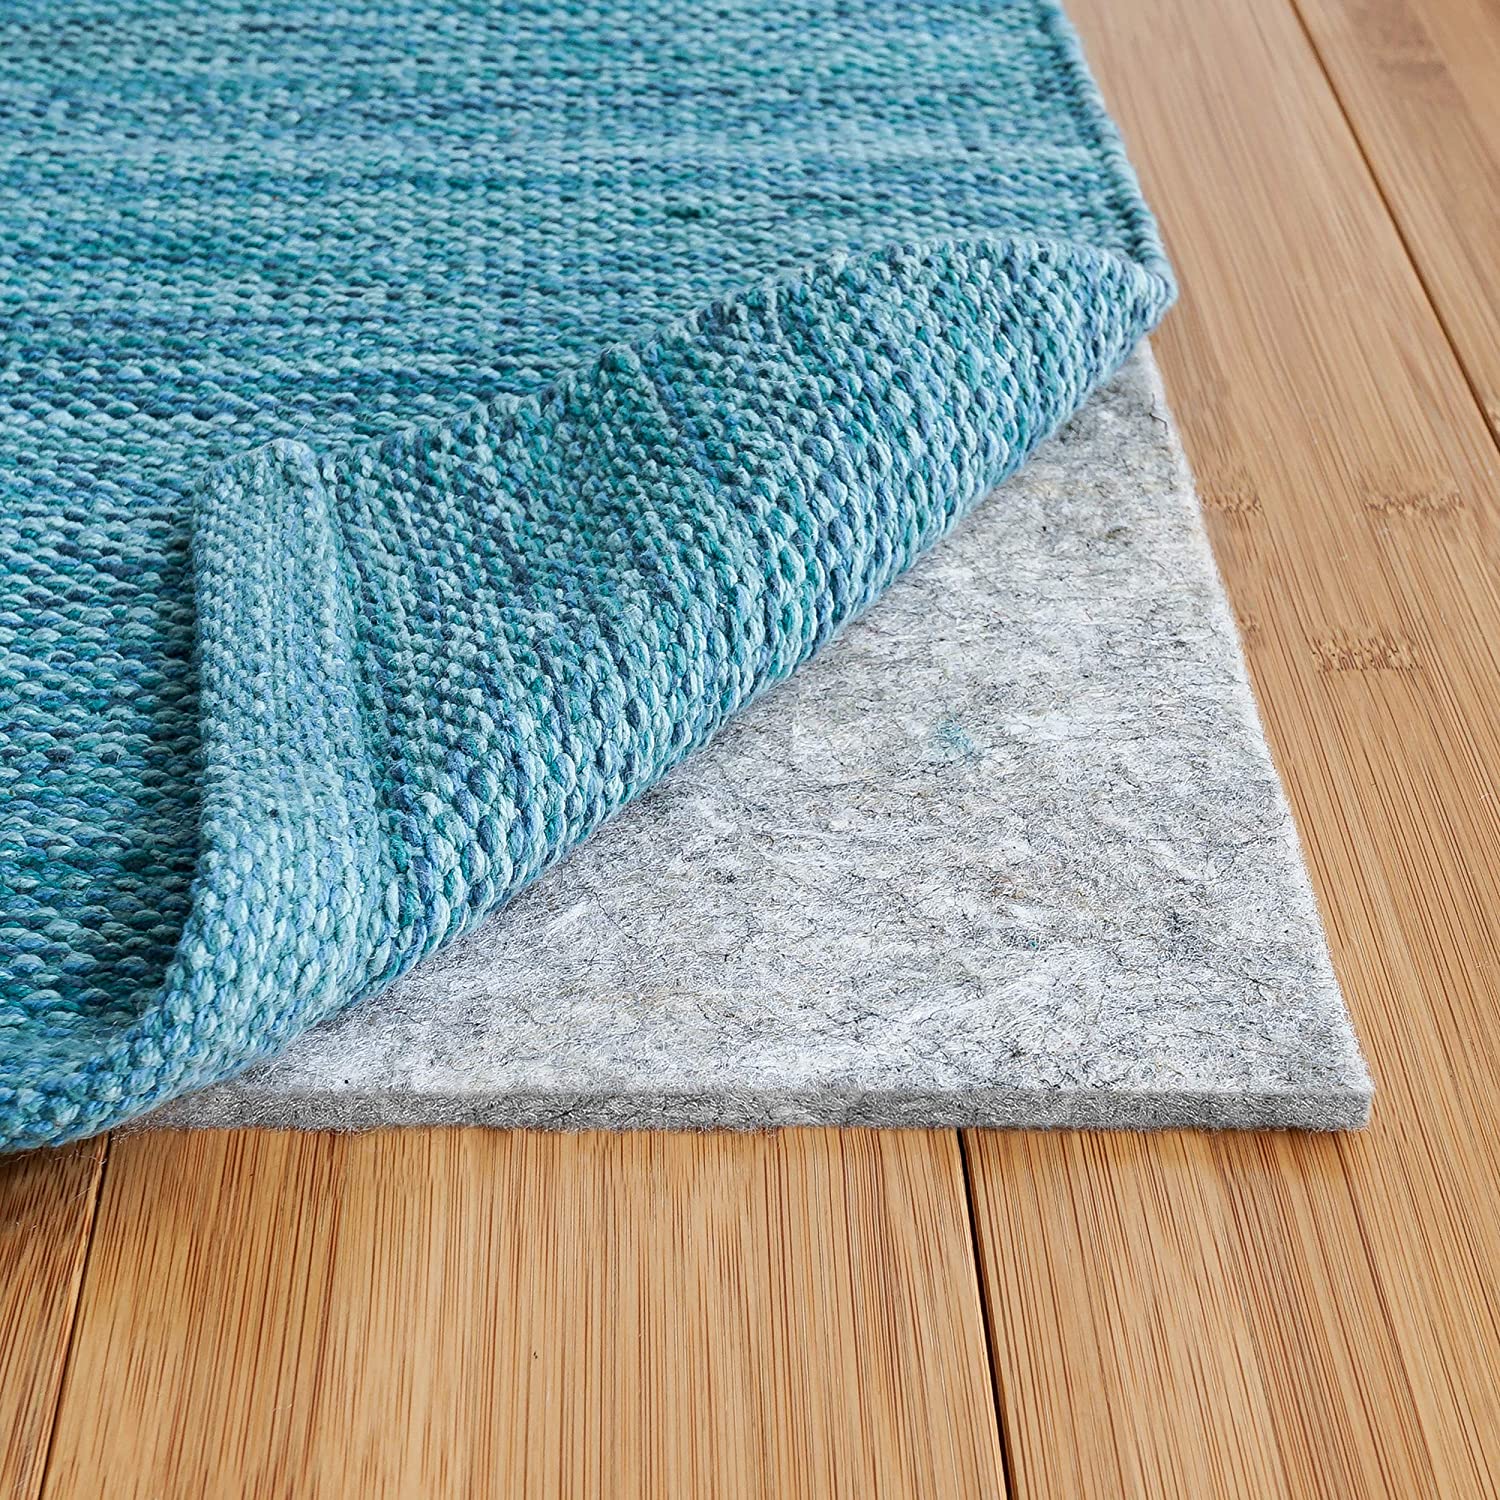 Are Polypropylene Rugs Safe For Vinyl Floors? - Sofa Today